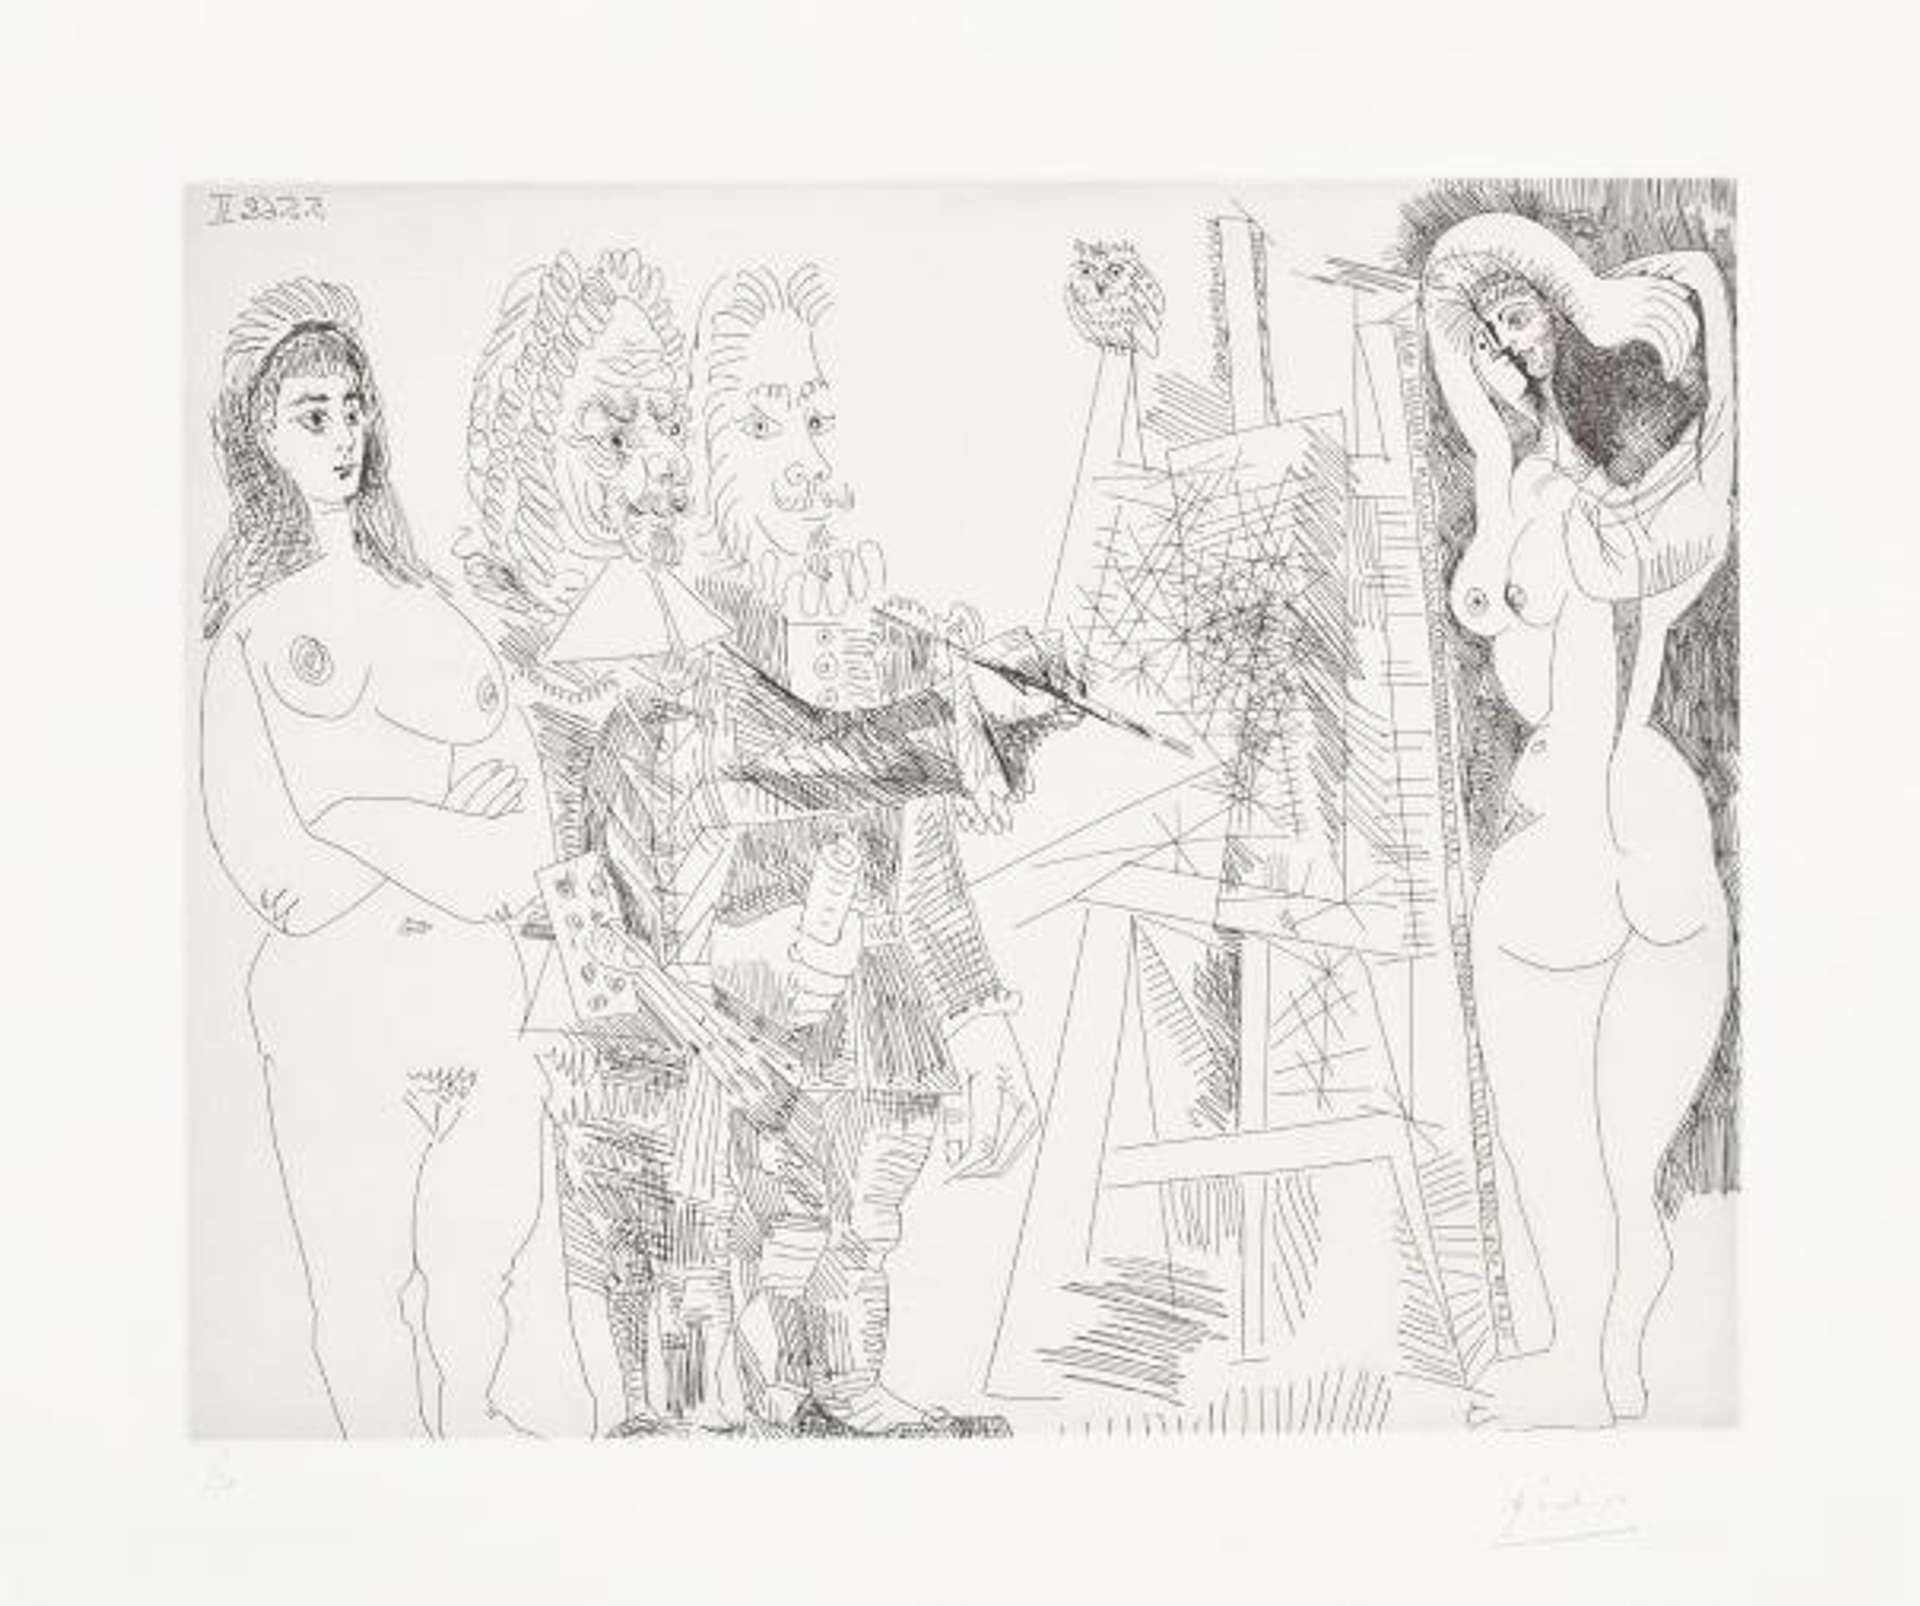 This print by Picasso shows an artist's Studio, With an Owl, Model and an Official Envoy